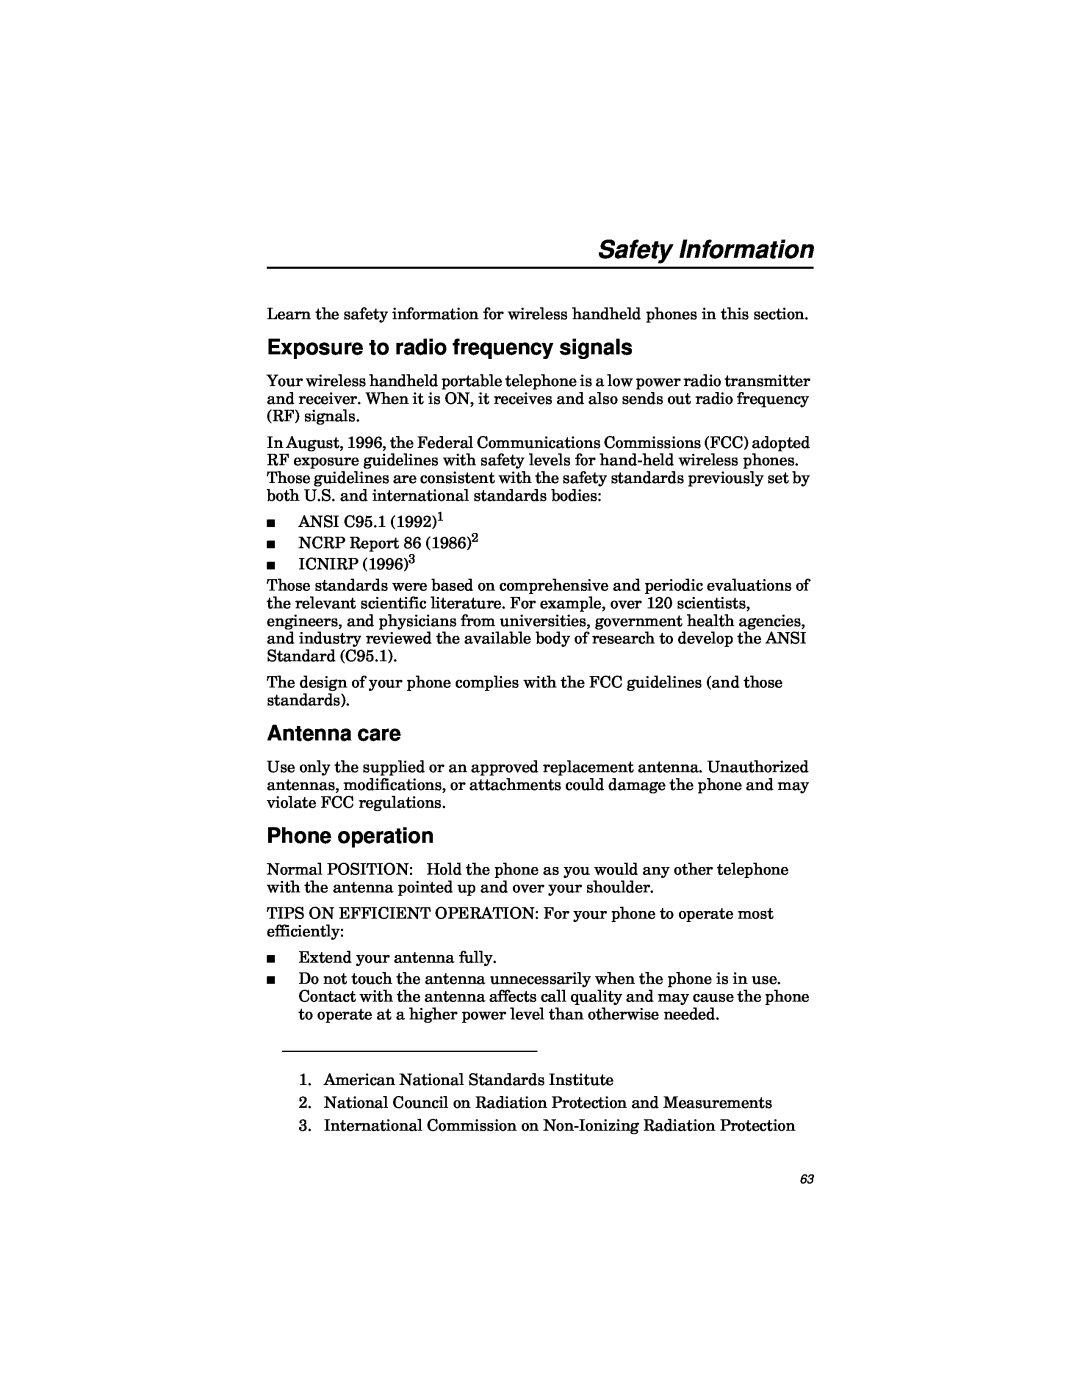 Qualcomm GSP-1600 manual Safety Information, Exposure to radio frequency signals, Antenna care, Phone operation 